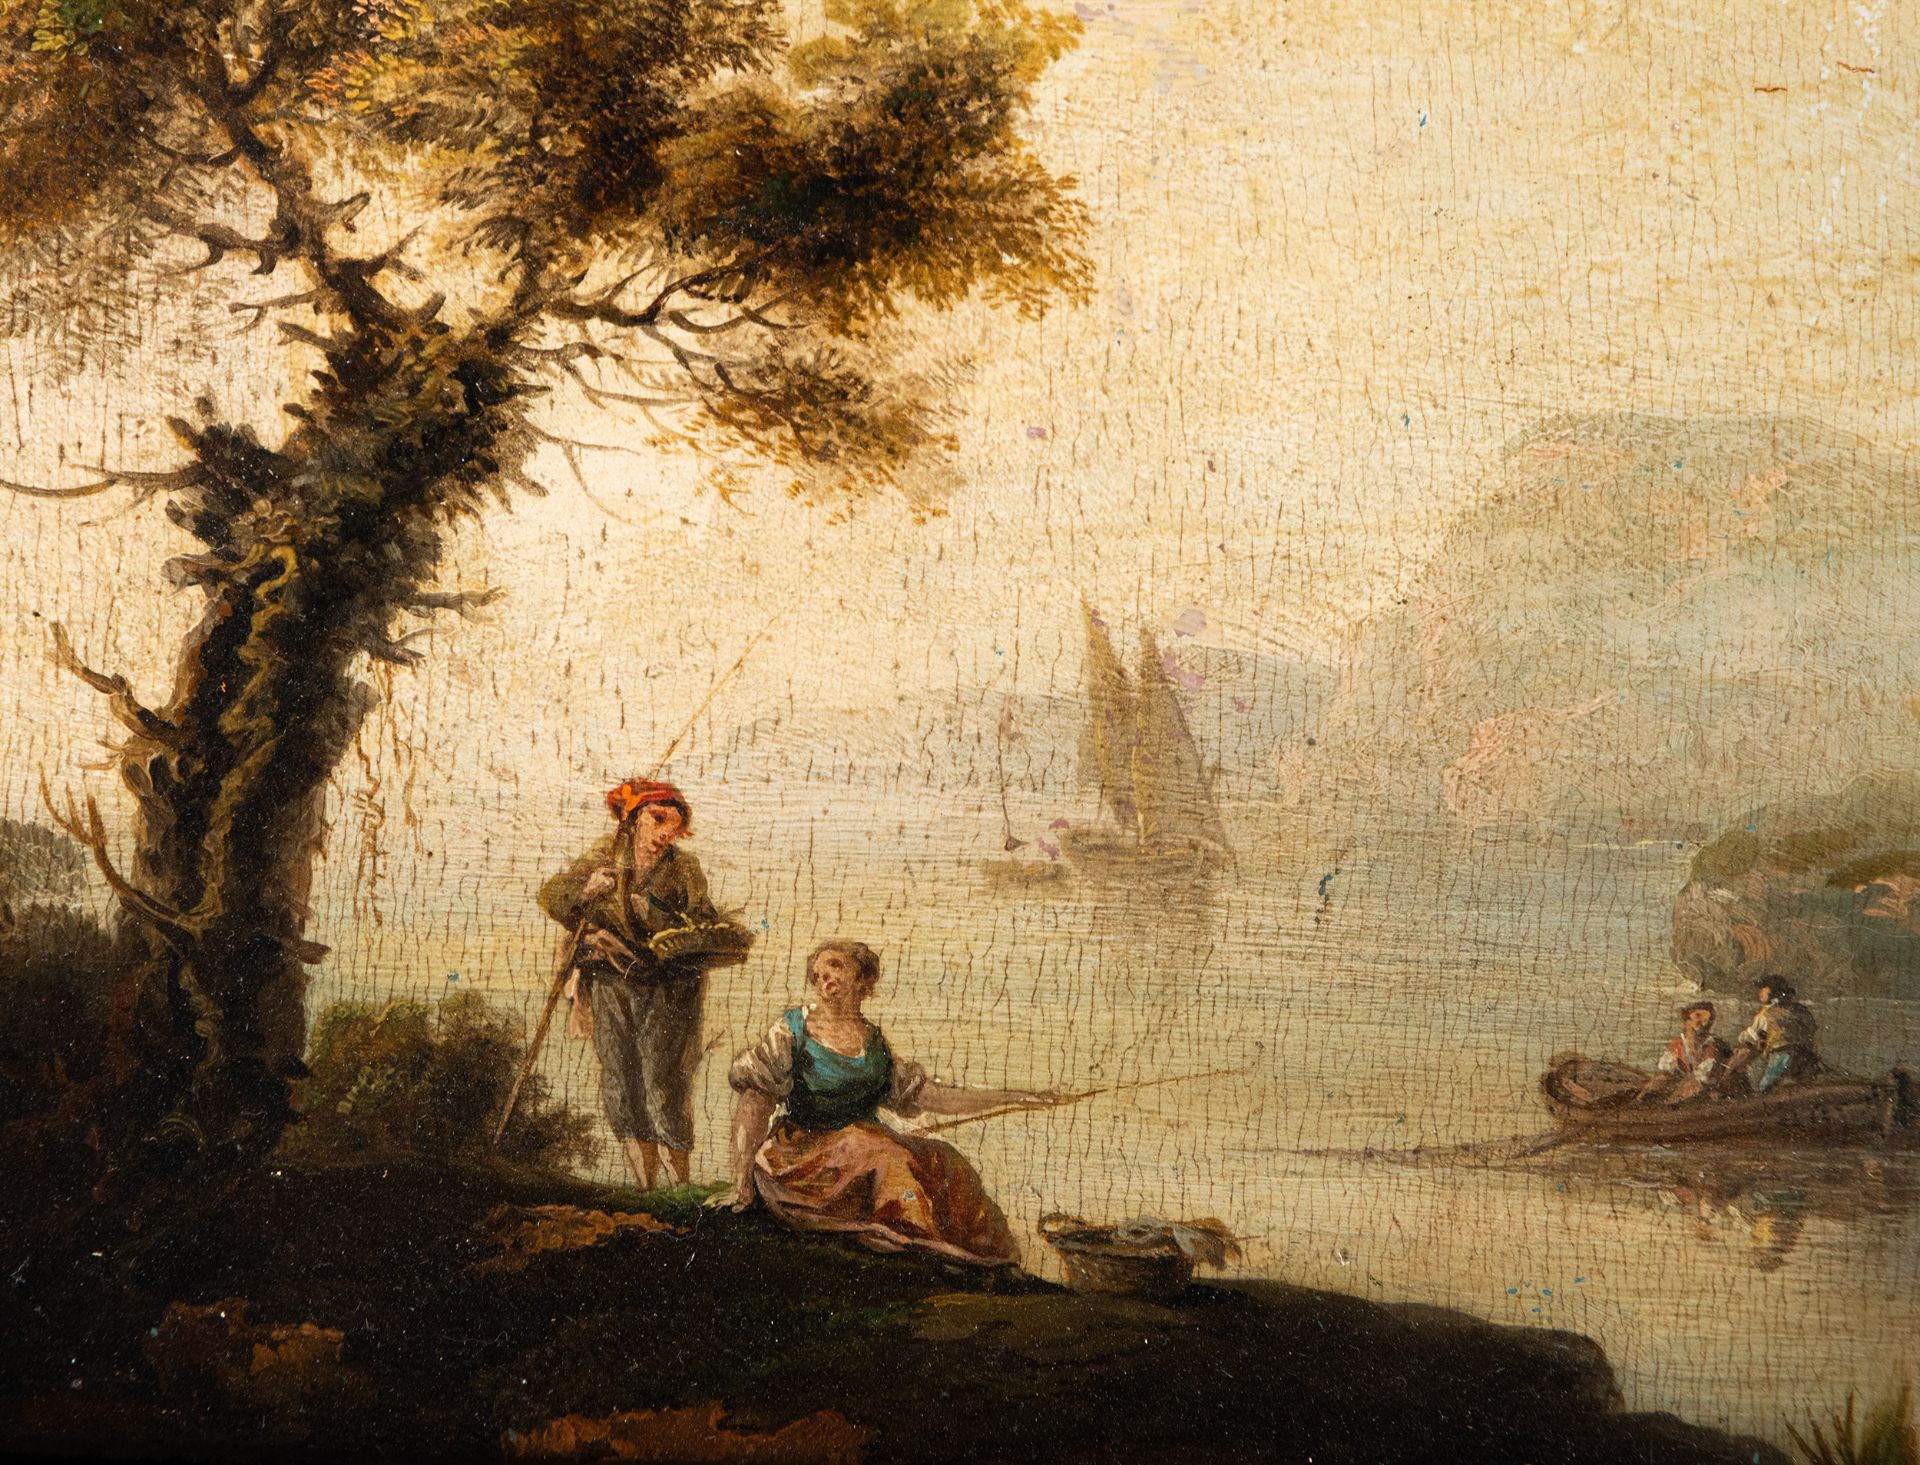 View of Bahia with Characters, Italian Flemish school from the second half of the 17th century - Image 3 of 4